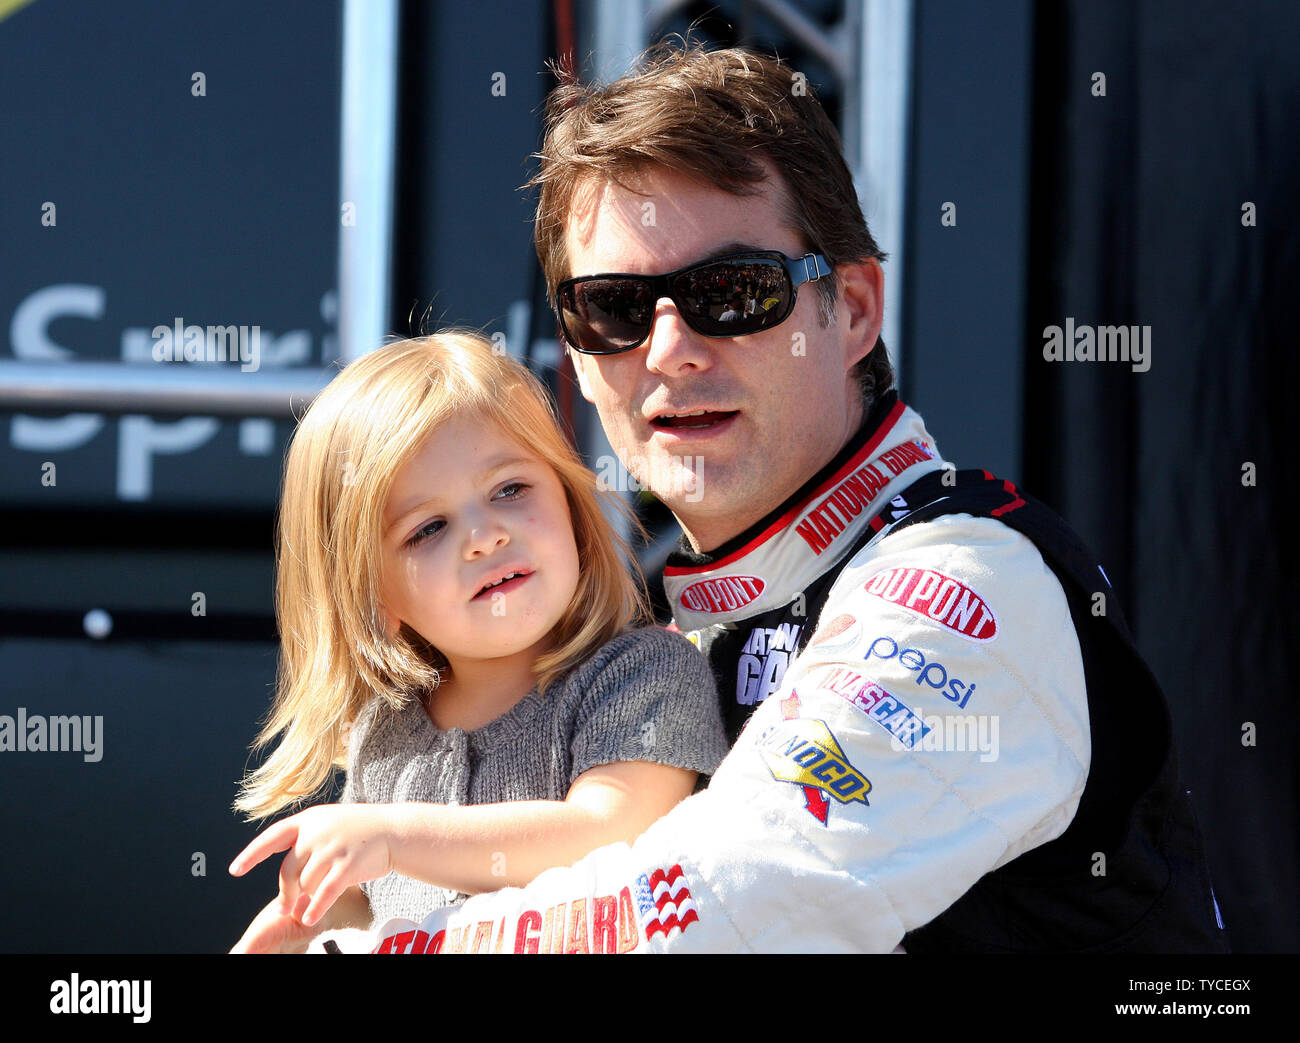 Jeff Gordon holds his daughter Ella Sofia Gordon, prior to driver introductions for the NASCAR Sylvania 300 at New Hampshire Motor Speedway in Loudon, New Hampshire September 20, 2009.  UPI/Malcolm Hope Stock Photo